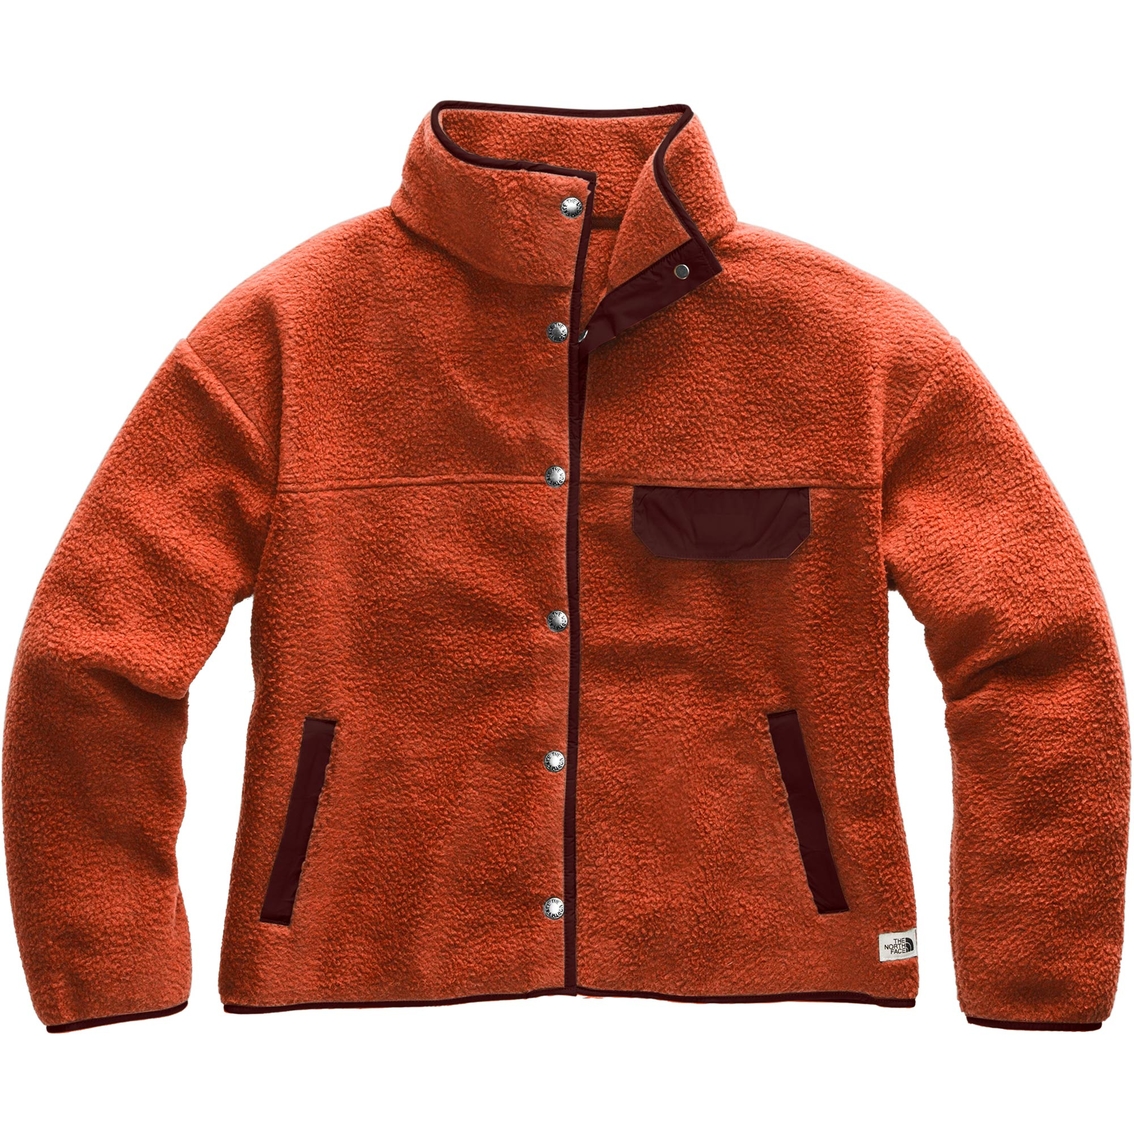 Exchange Jackets Clothing The | Cragmont Face | The | Jacket Accessories North Shop Fleece &